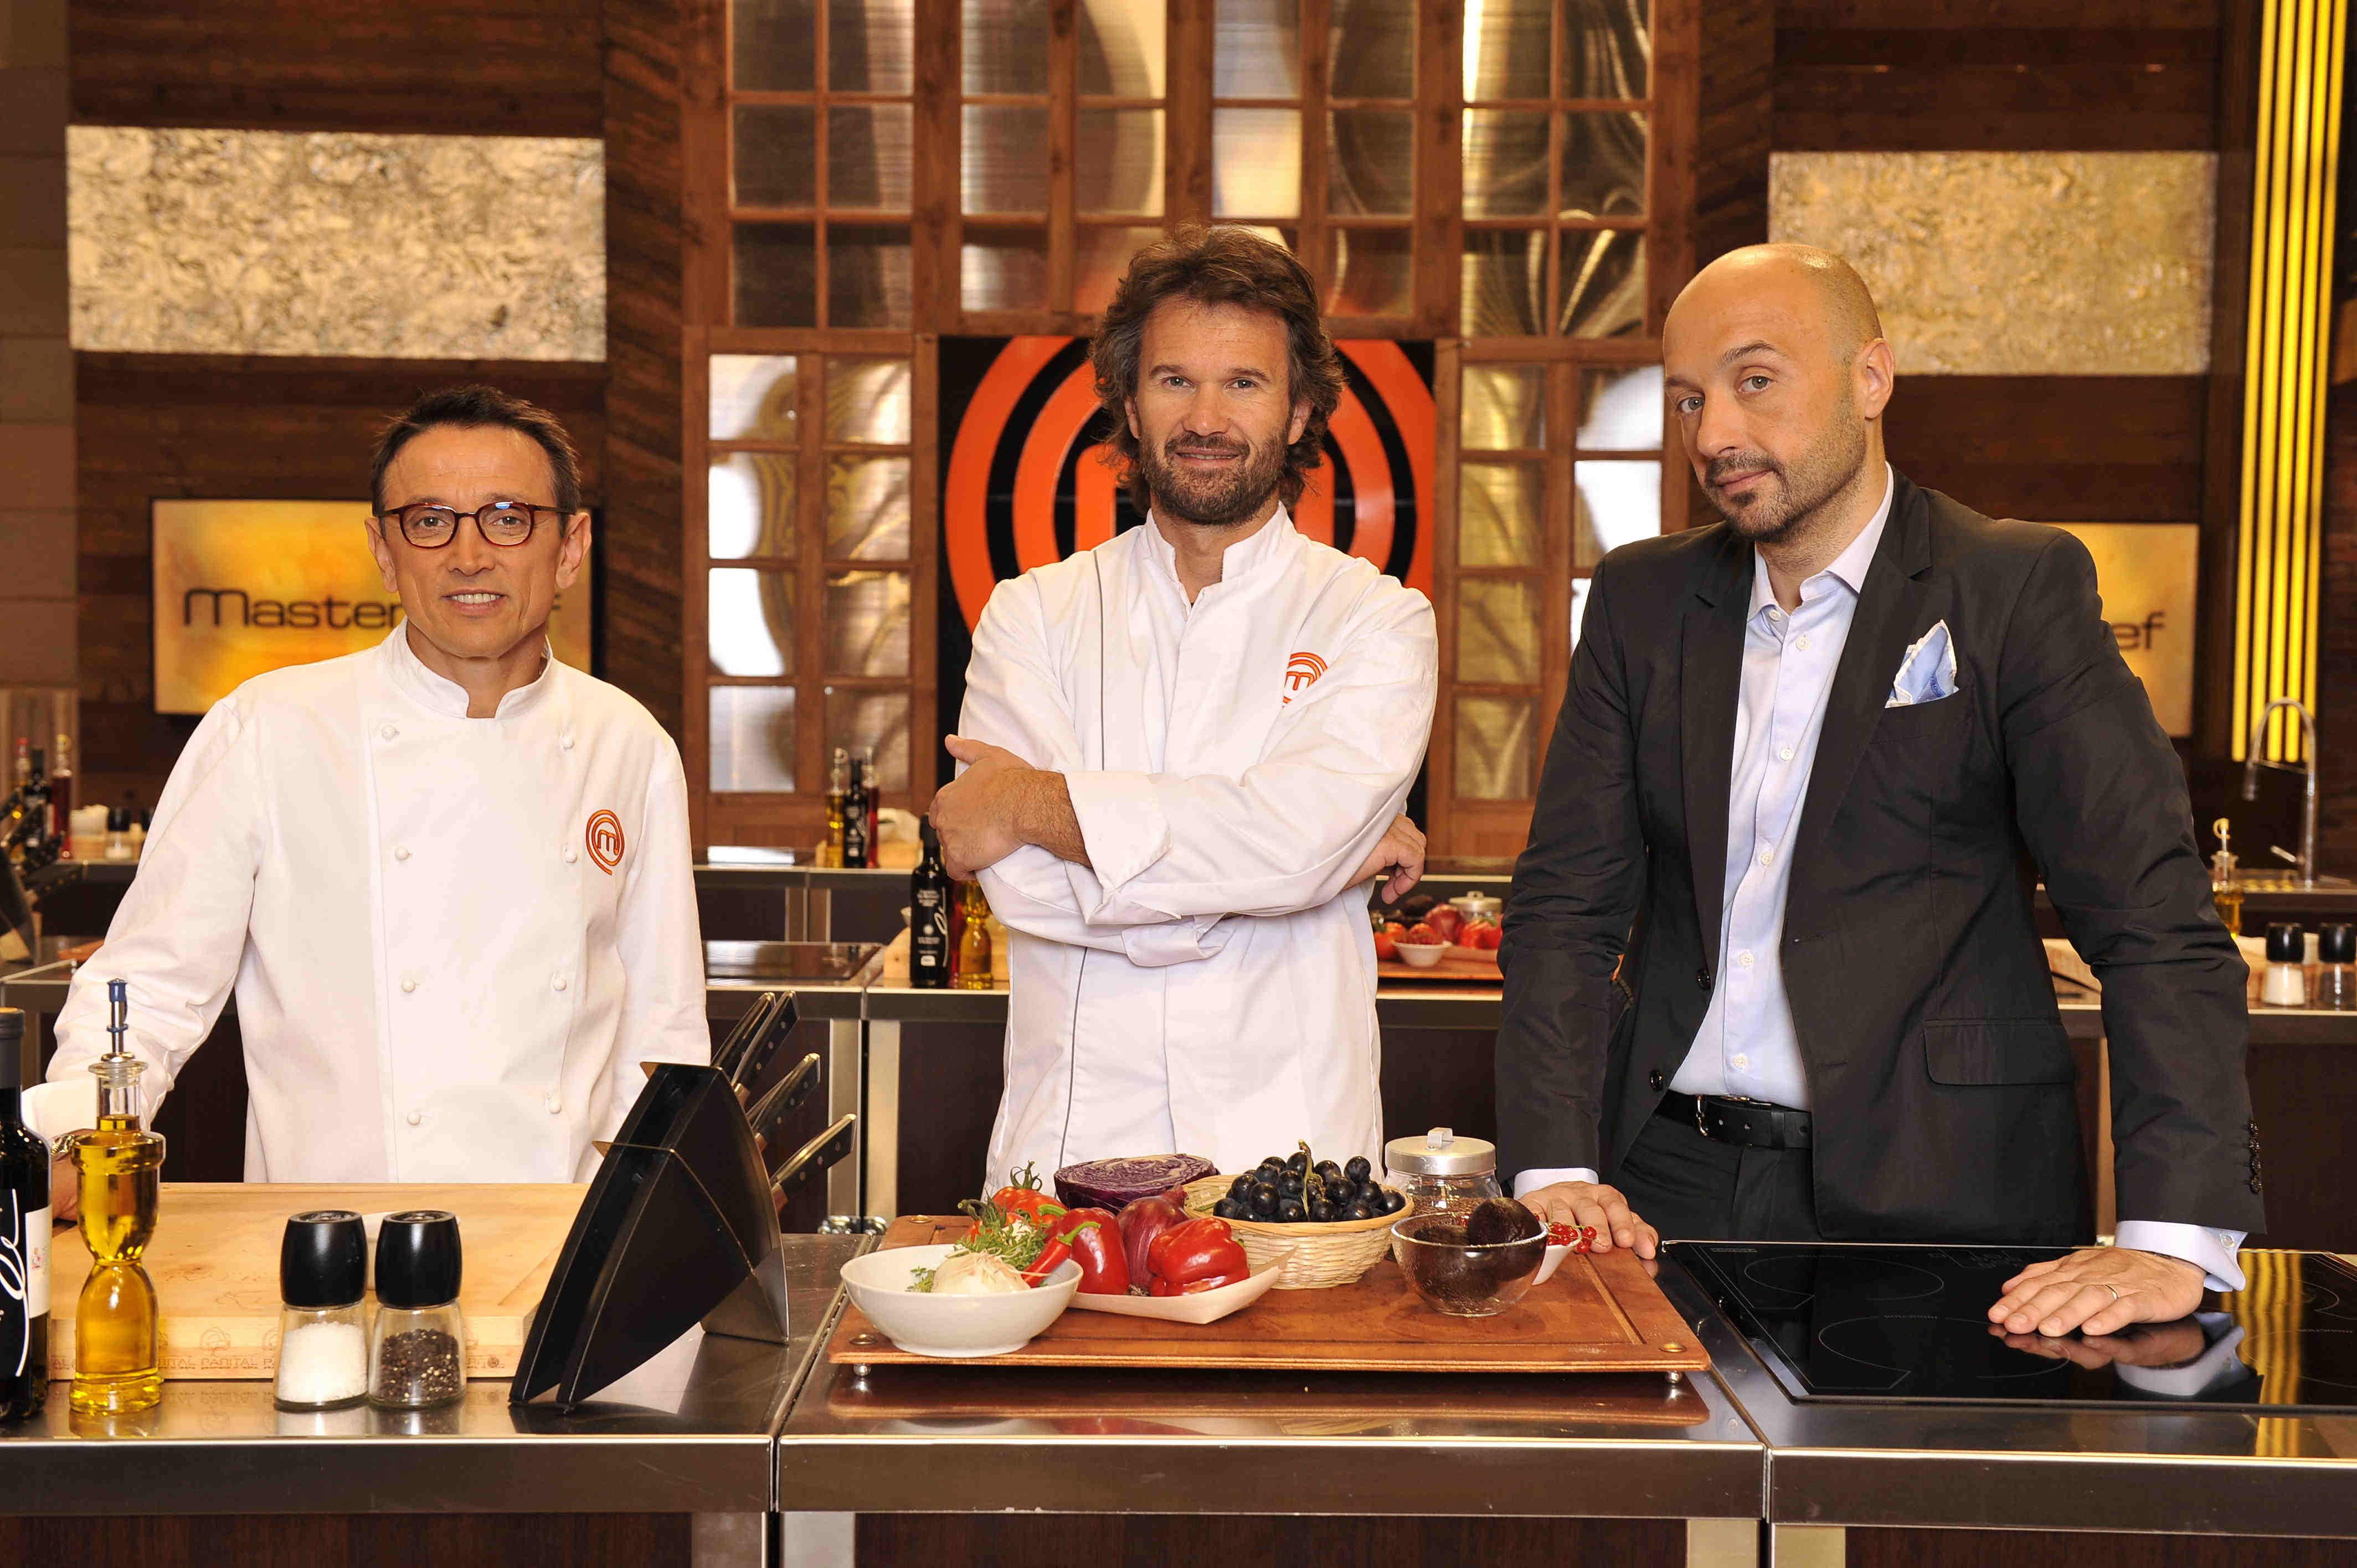 masterchef, Reality, Series, Cooking, Food, Master, Chef Wallpapers HD